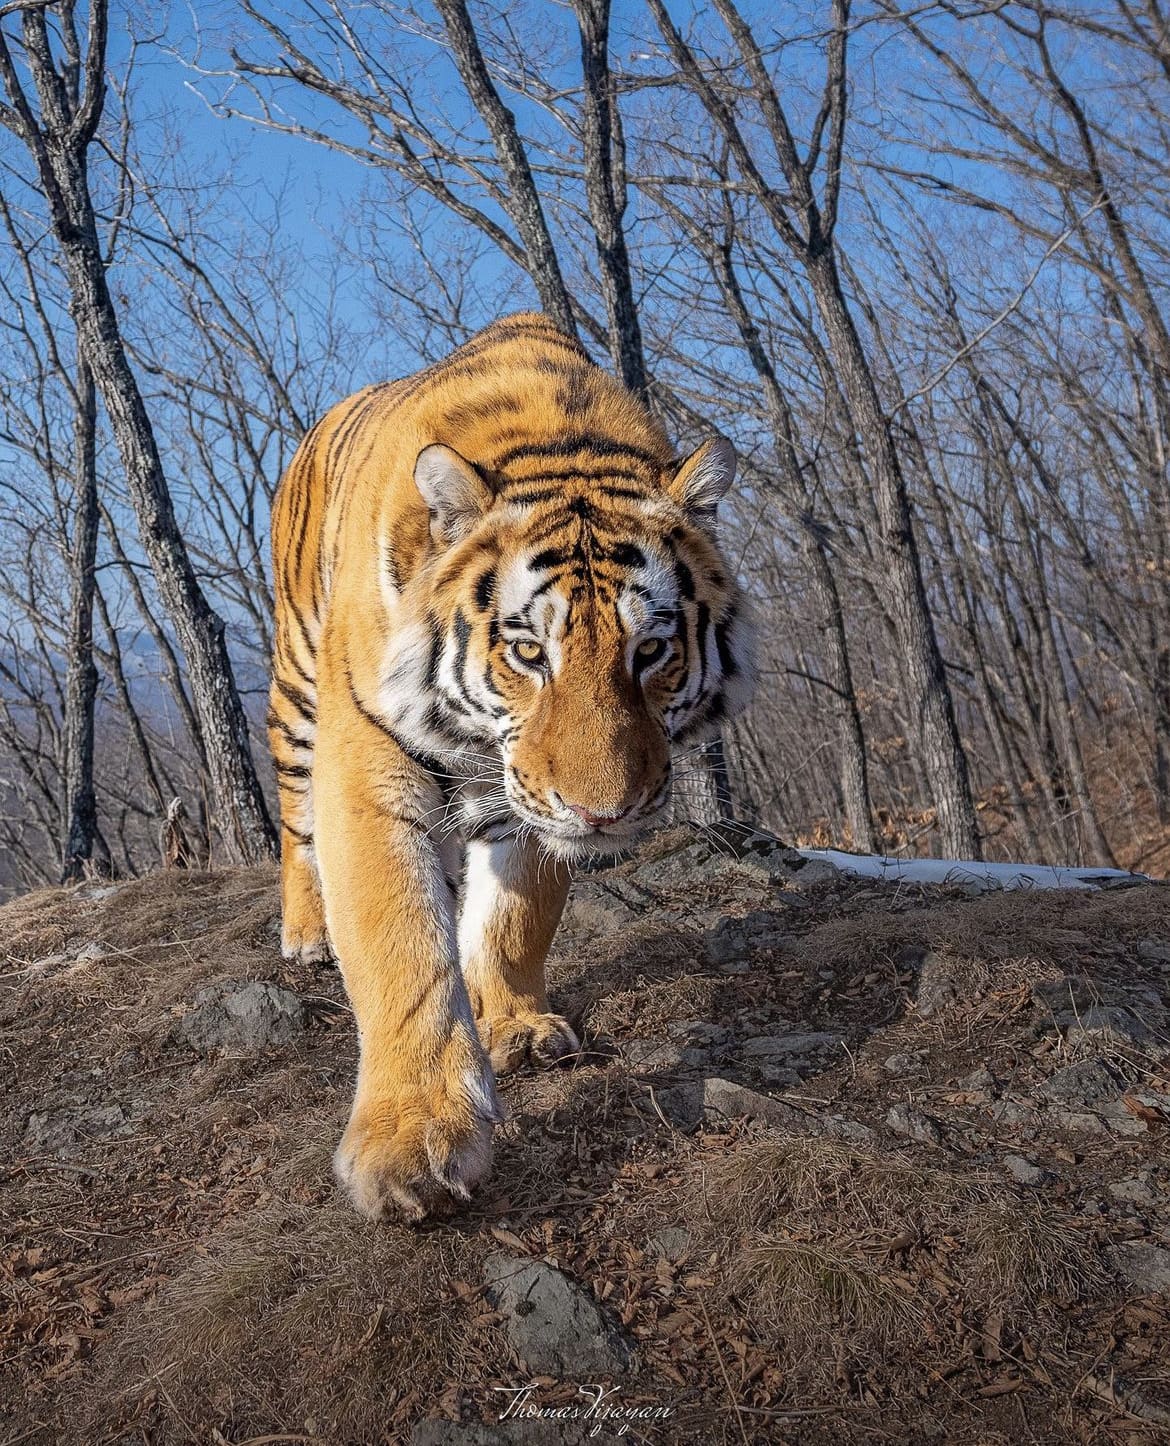 Tiger walking through the forest in the early morning